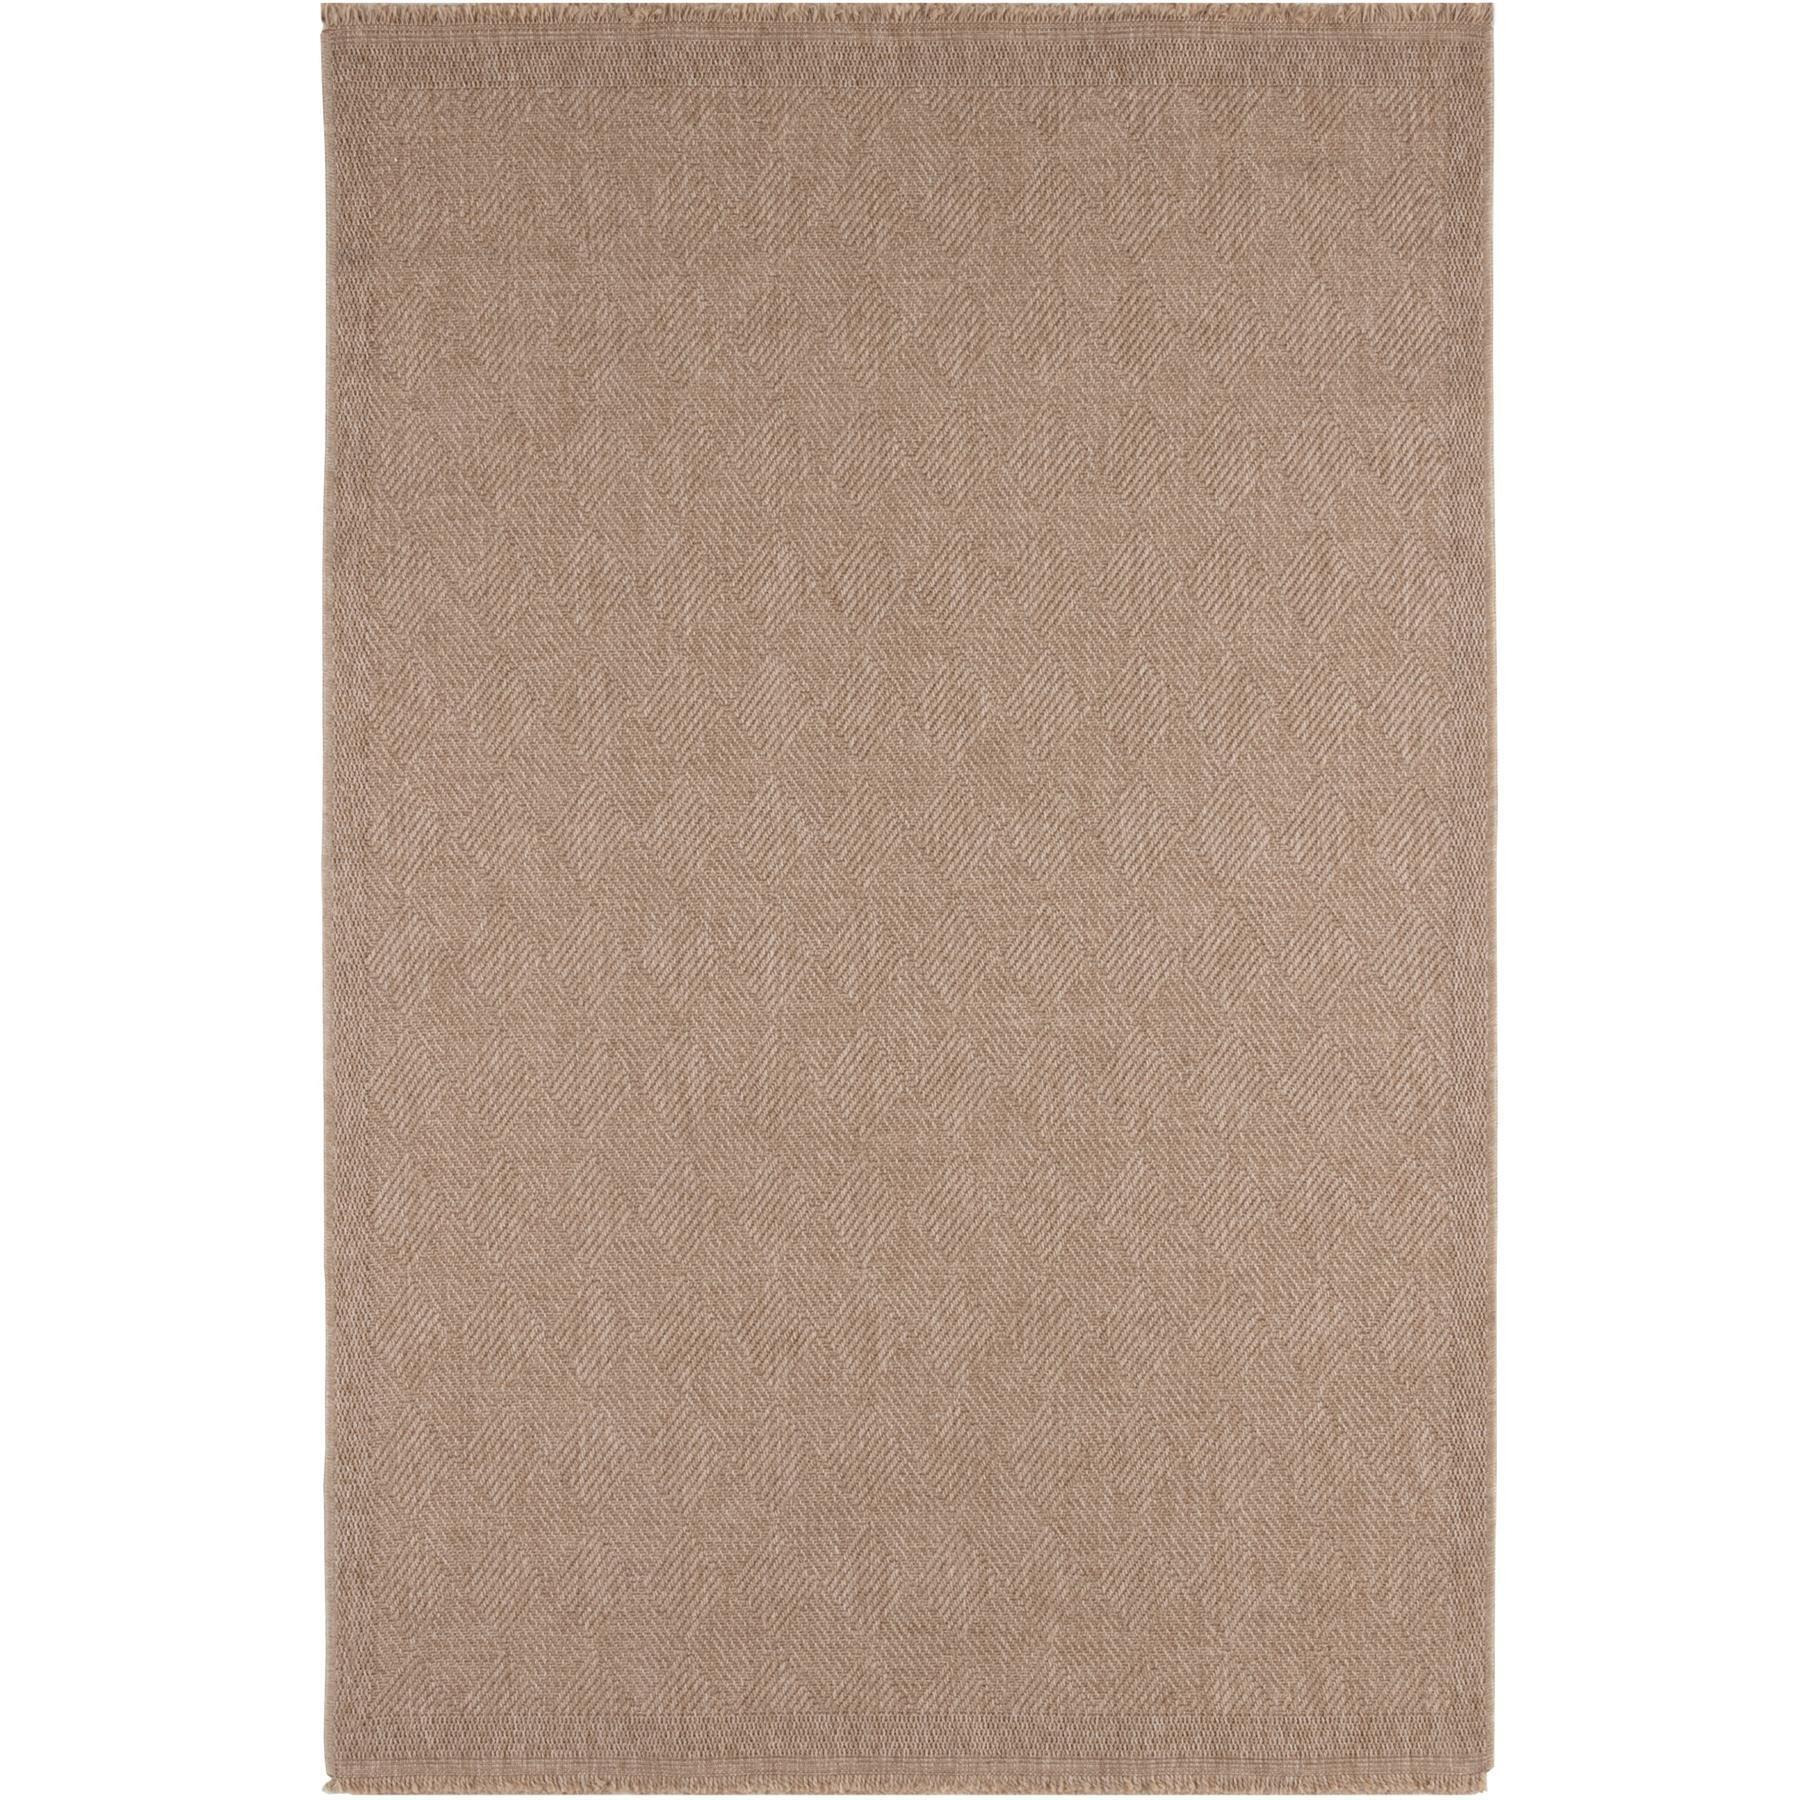 Nature Collection Outdoor Rug in Neutral - 5300N - image 1